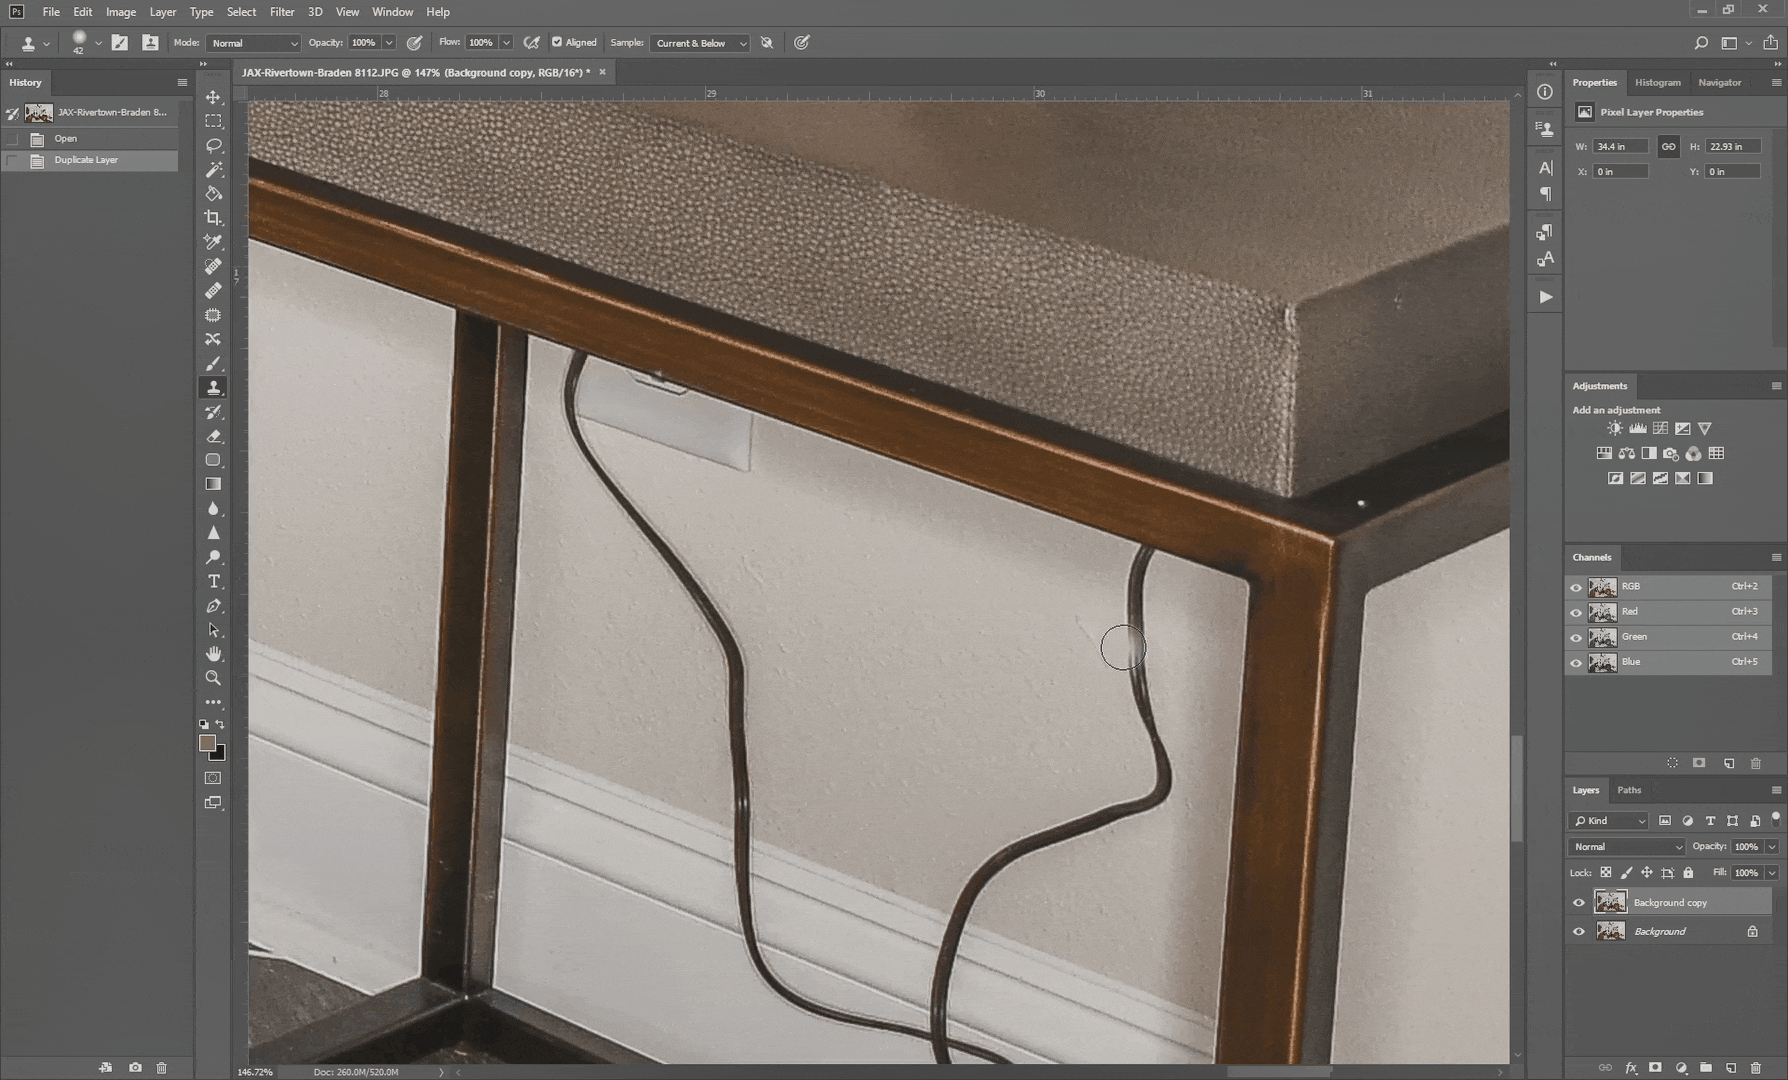 How to Remove Annoying Cords Using Photoshop